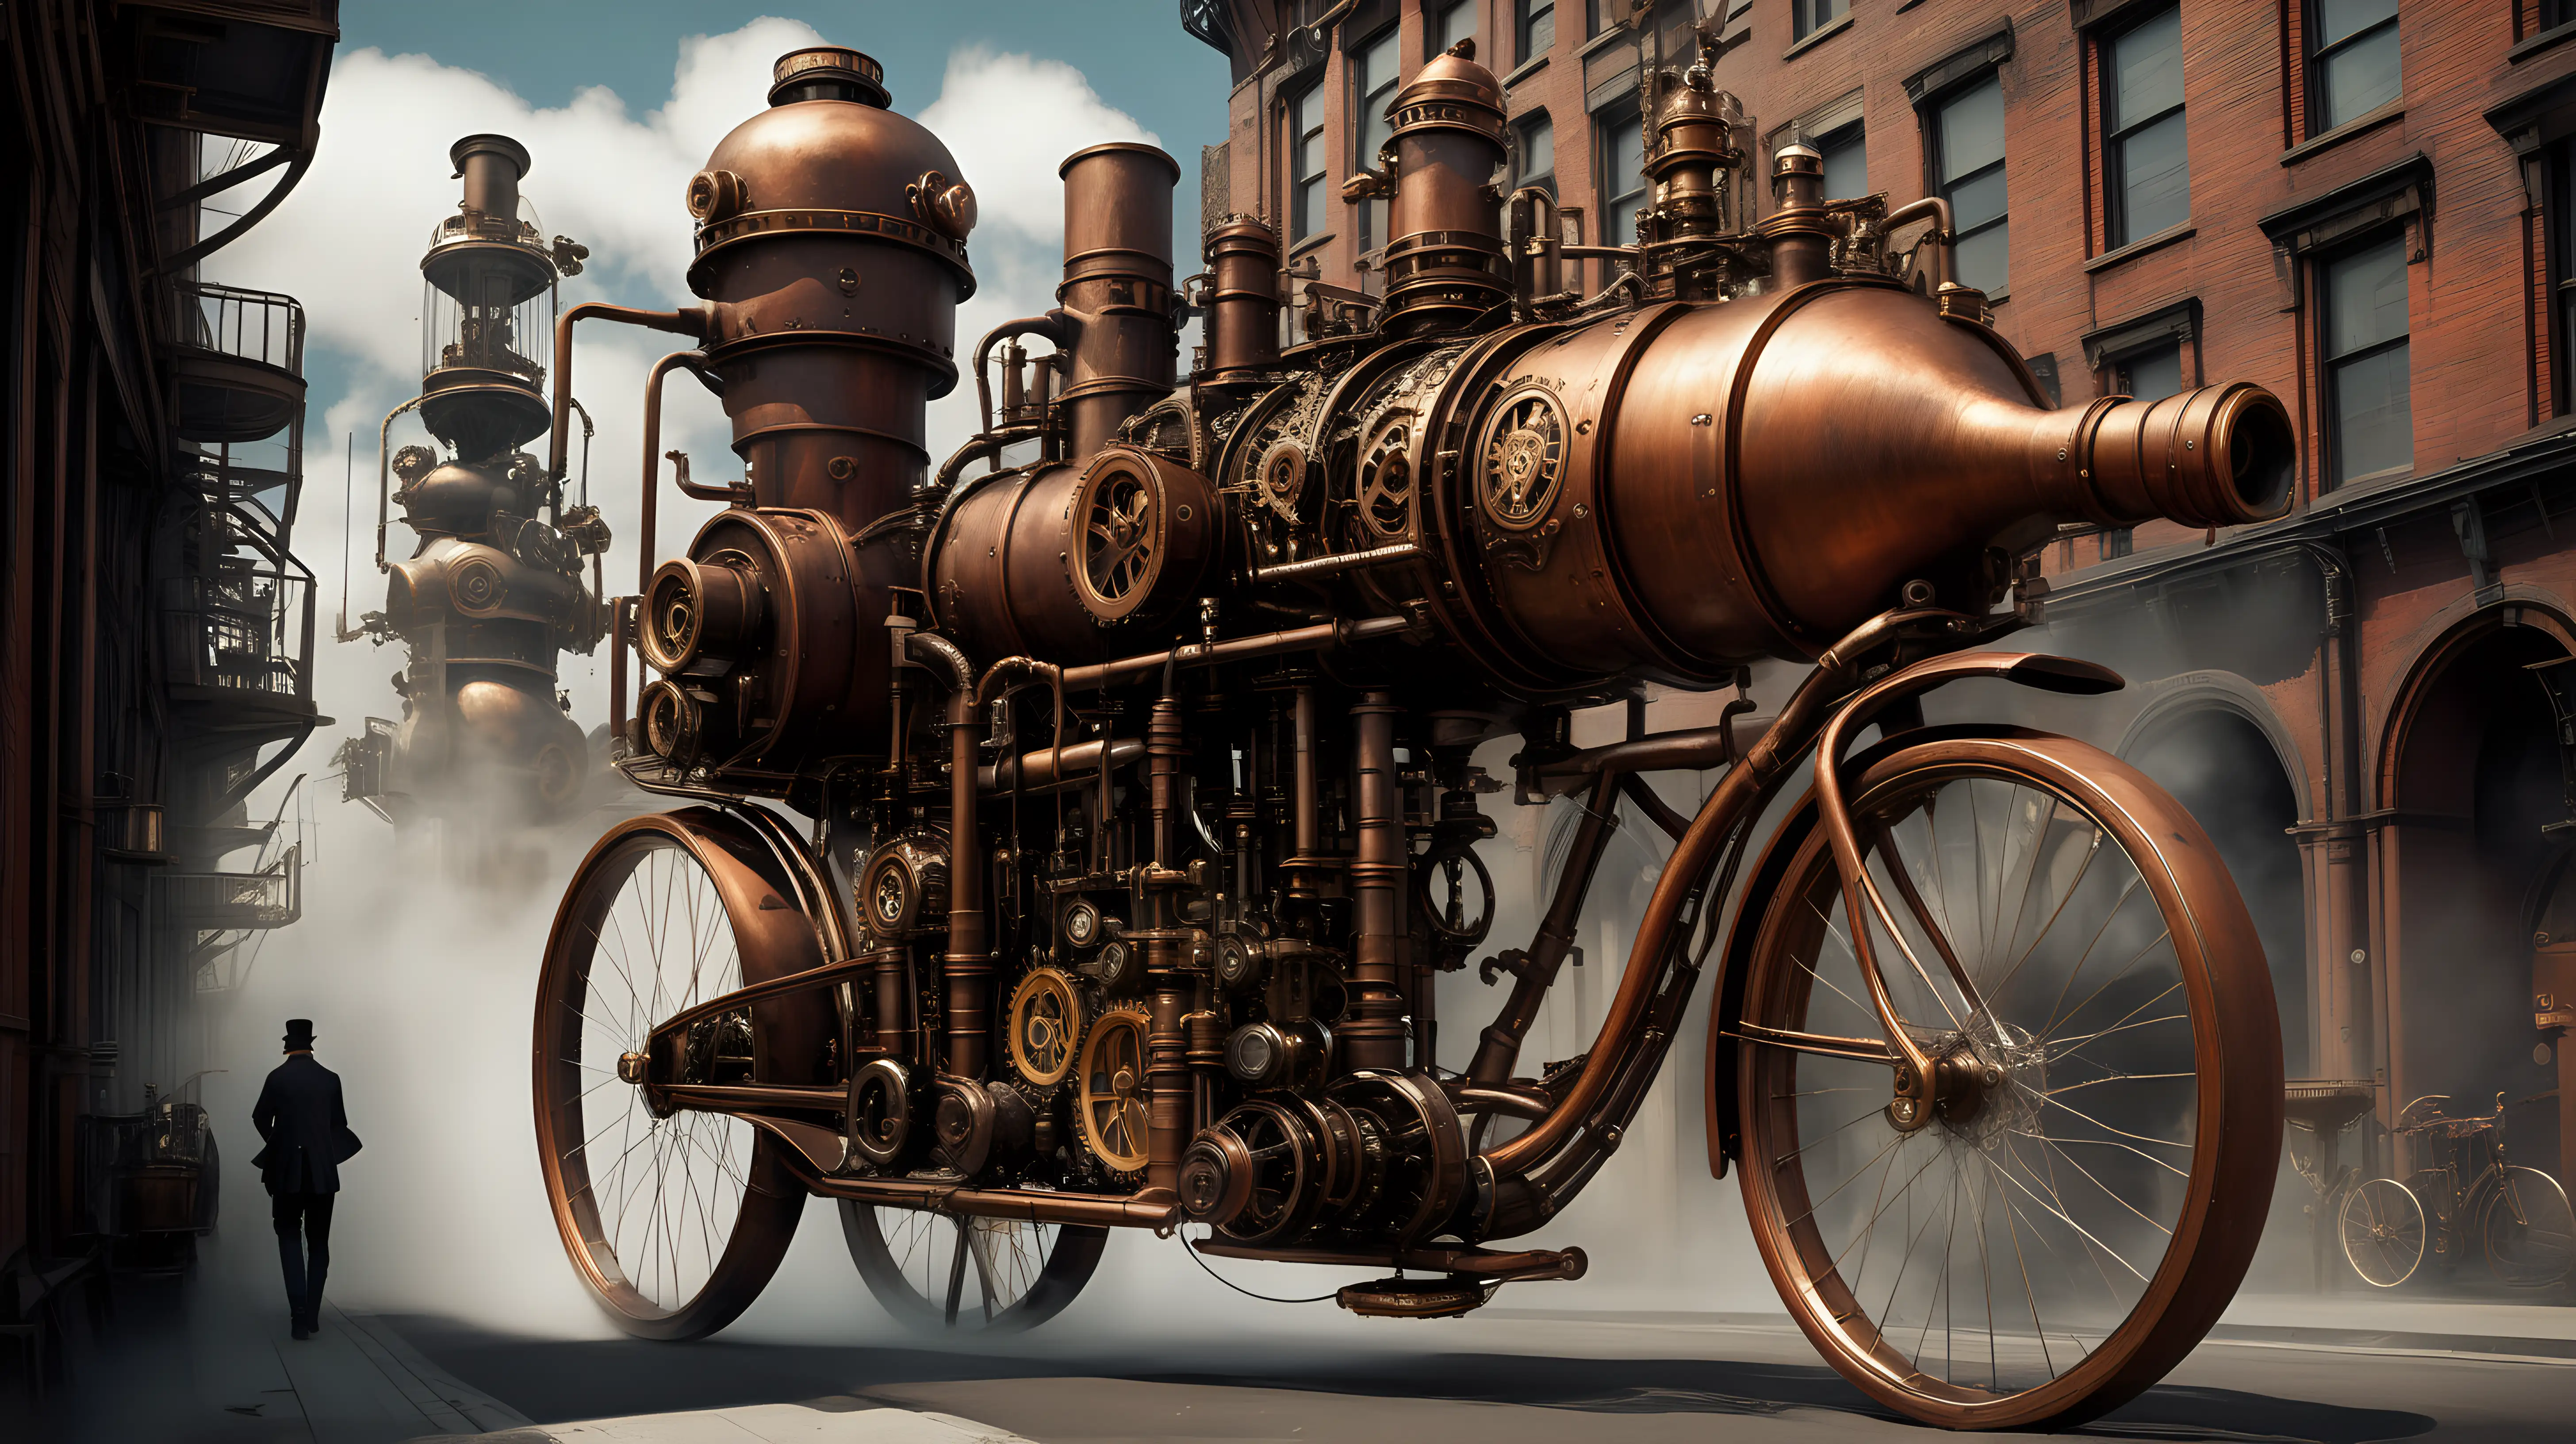 Steampunk bycicle steam engine city